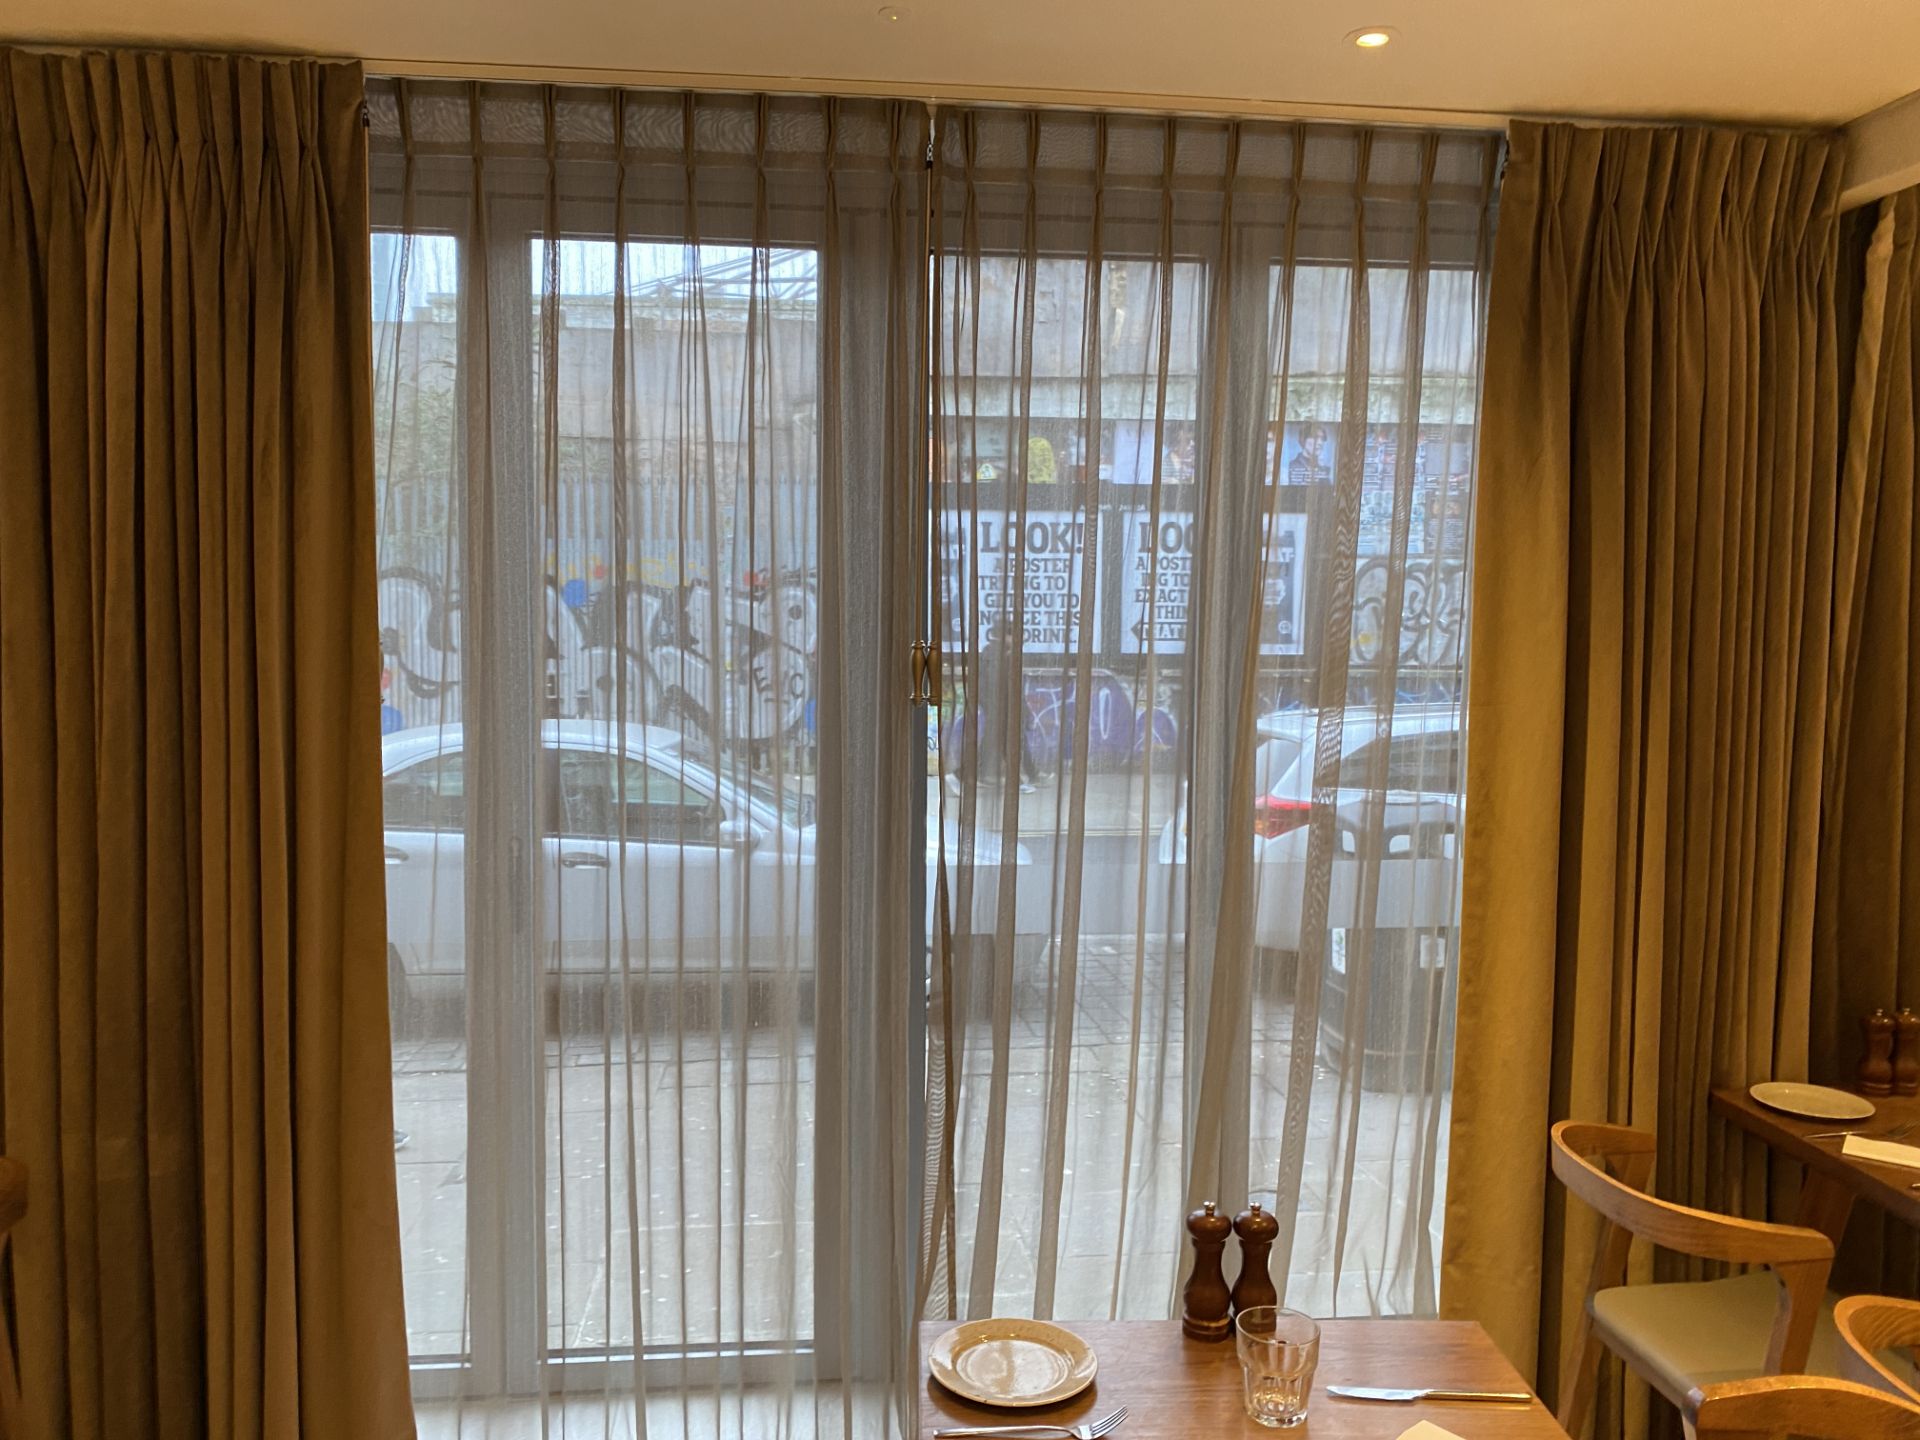 Commercial grade luxury blackout curtains - Image 2 of 2